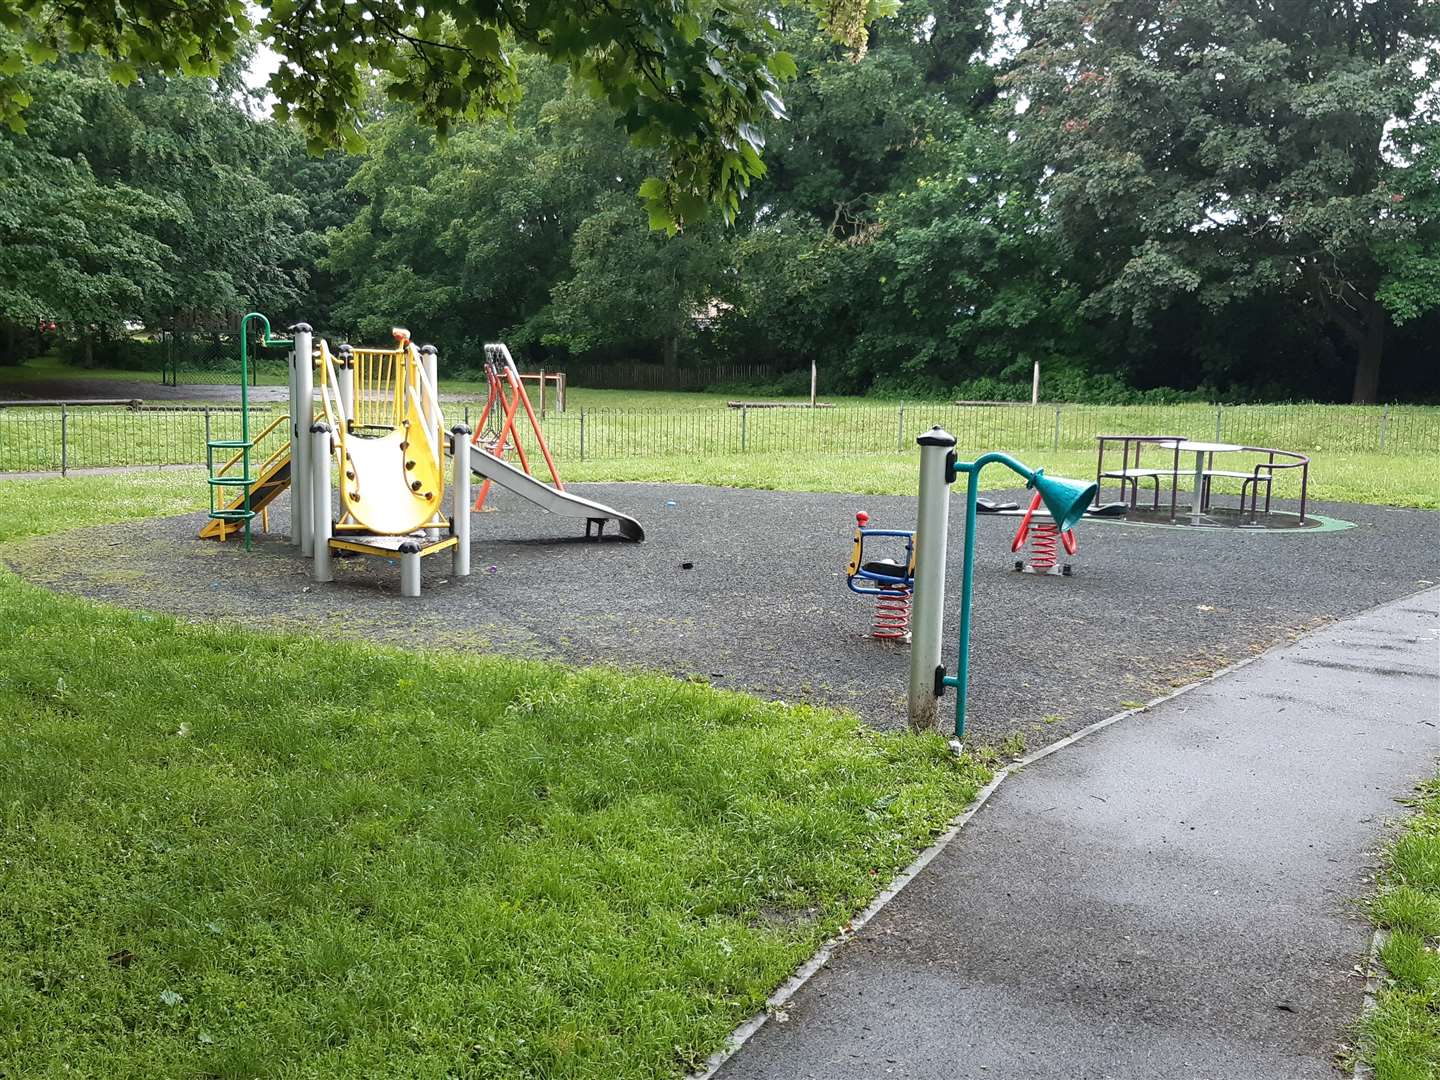 The Ashurst Road Play Area where the child was bitten